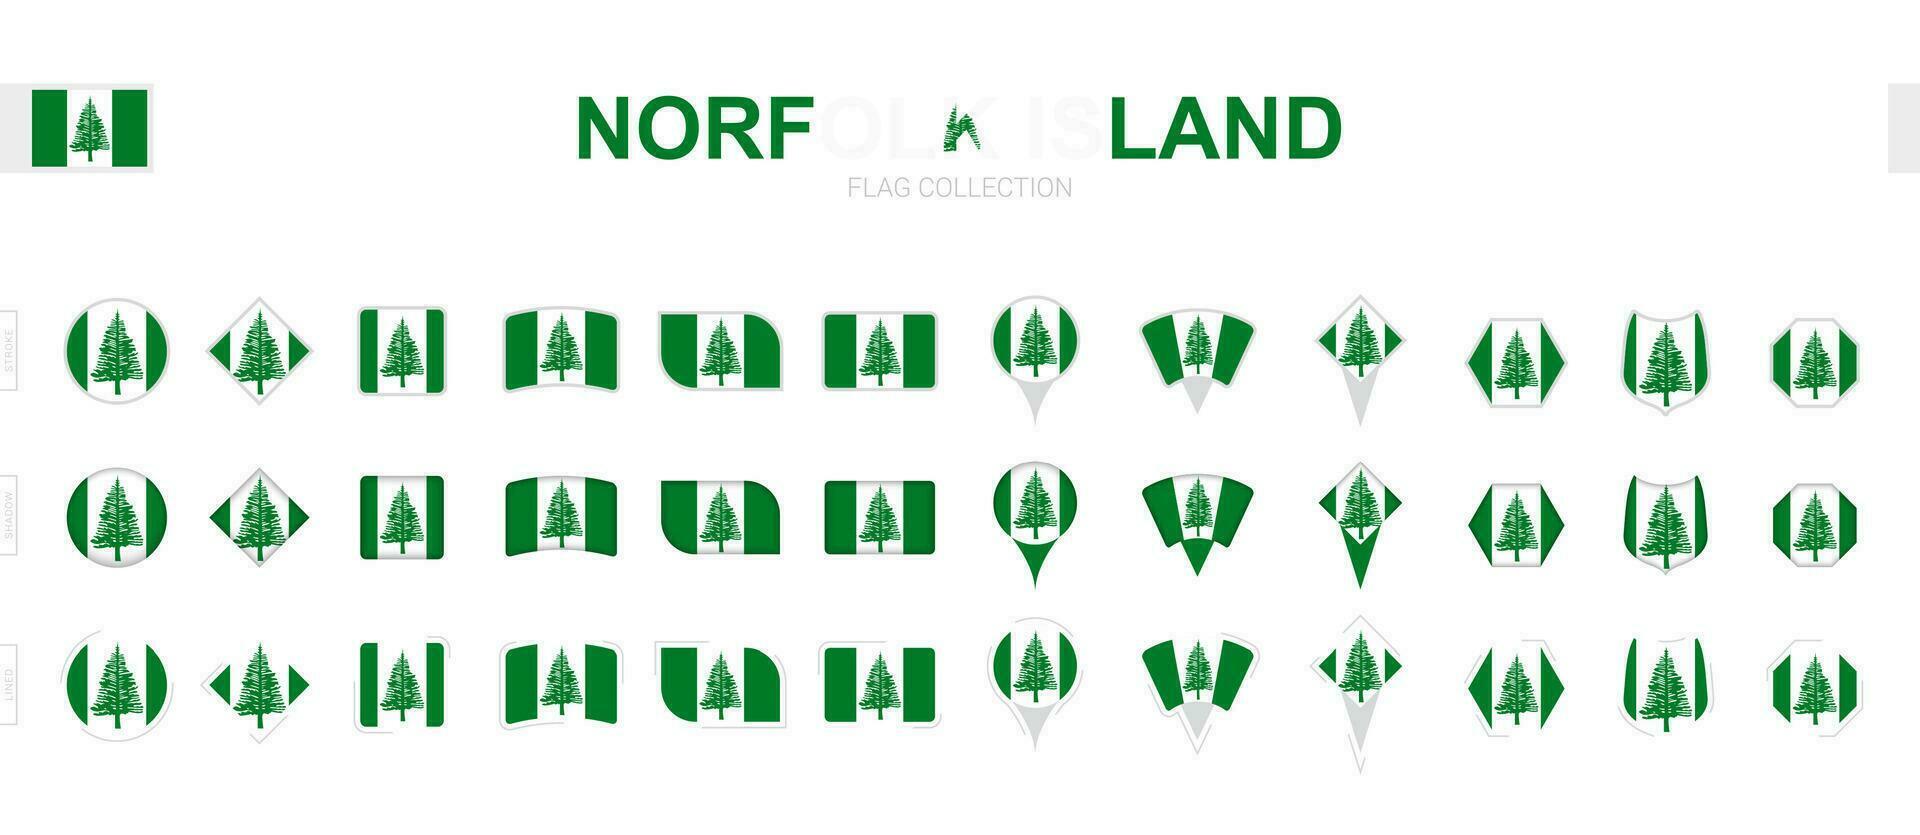 Large collection of Norfolk Island flags of various shapes and effects. vector